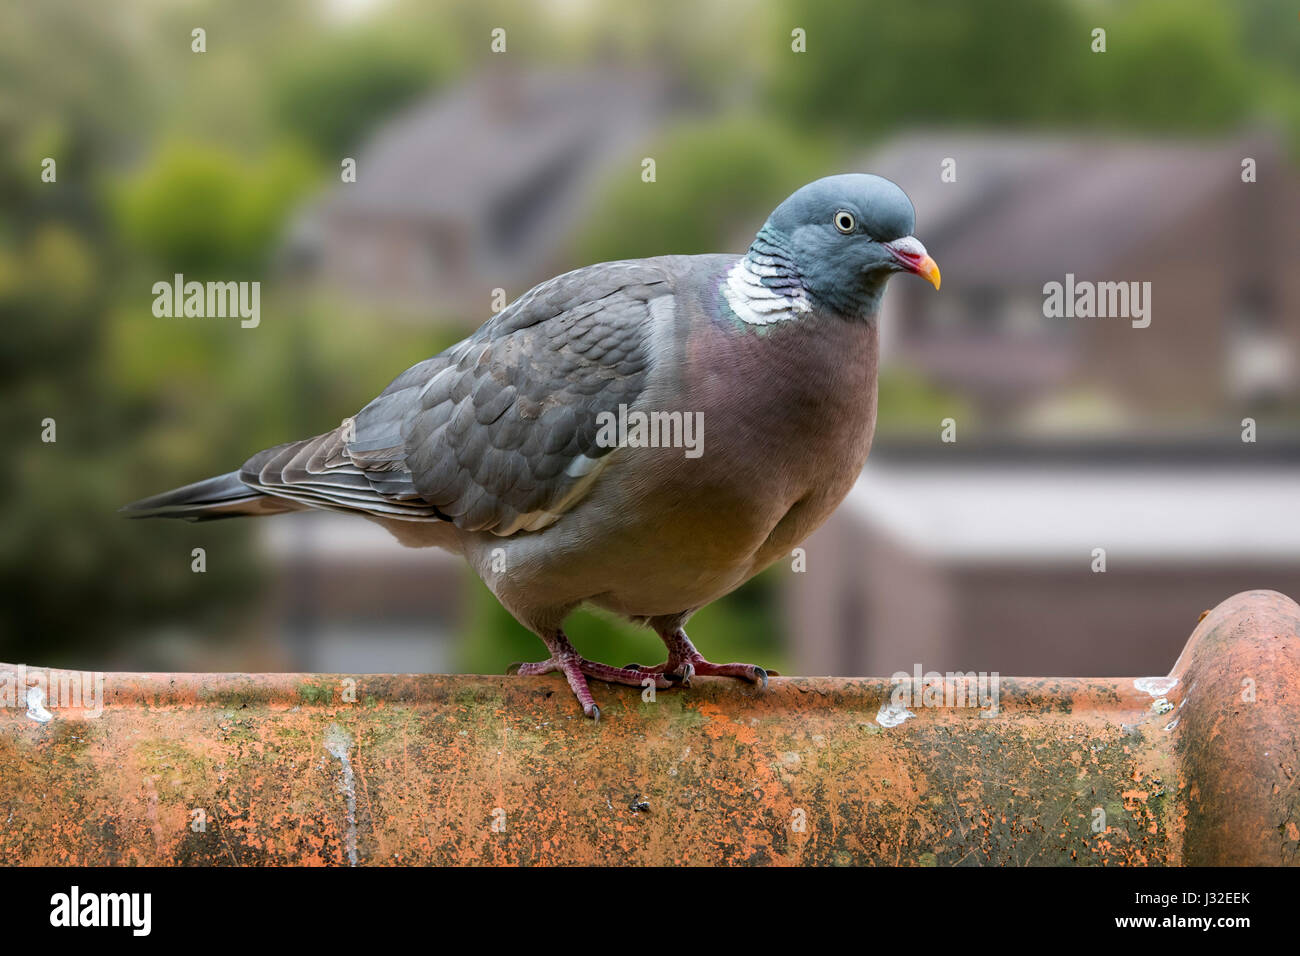 Common wood pigeon (Columba palumbus) perched on roof tile of house Stock Photo